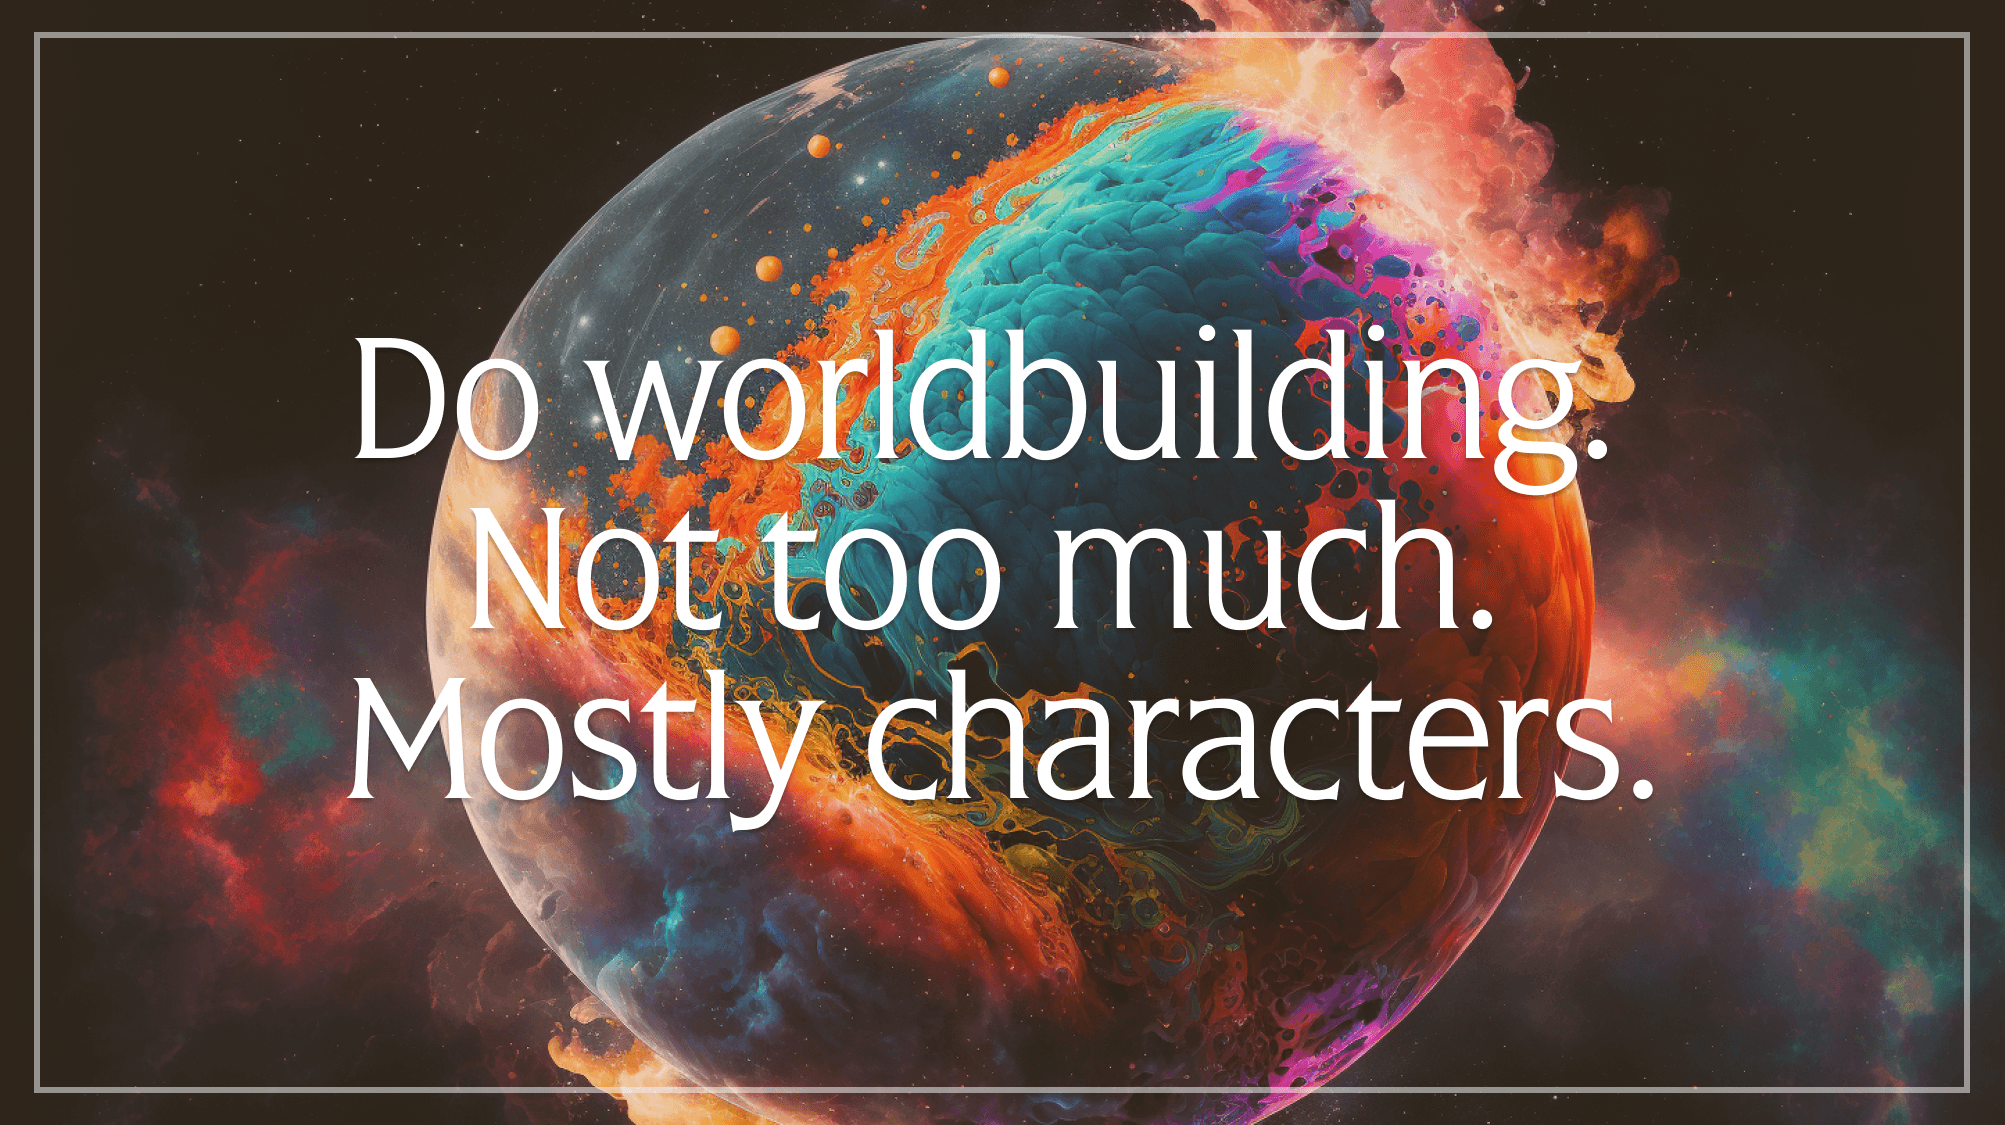 Do worldbuilding. Not too much. Mostly characters. Five worldbuilding pitfalls to avoid.